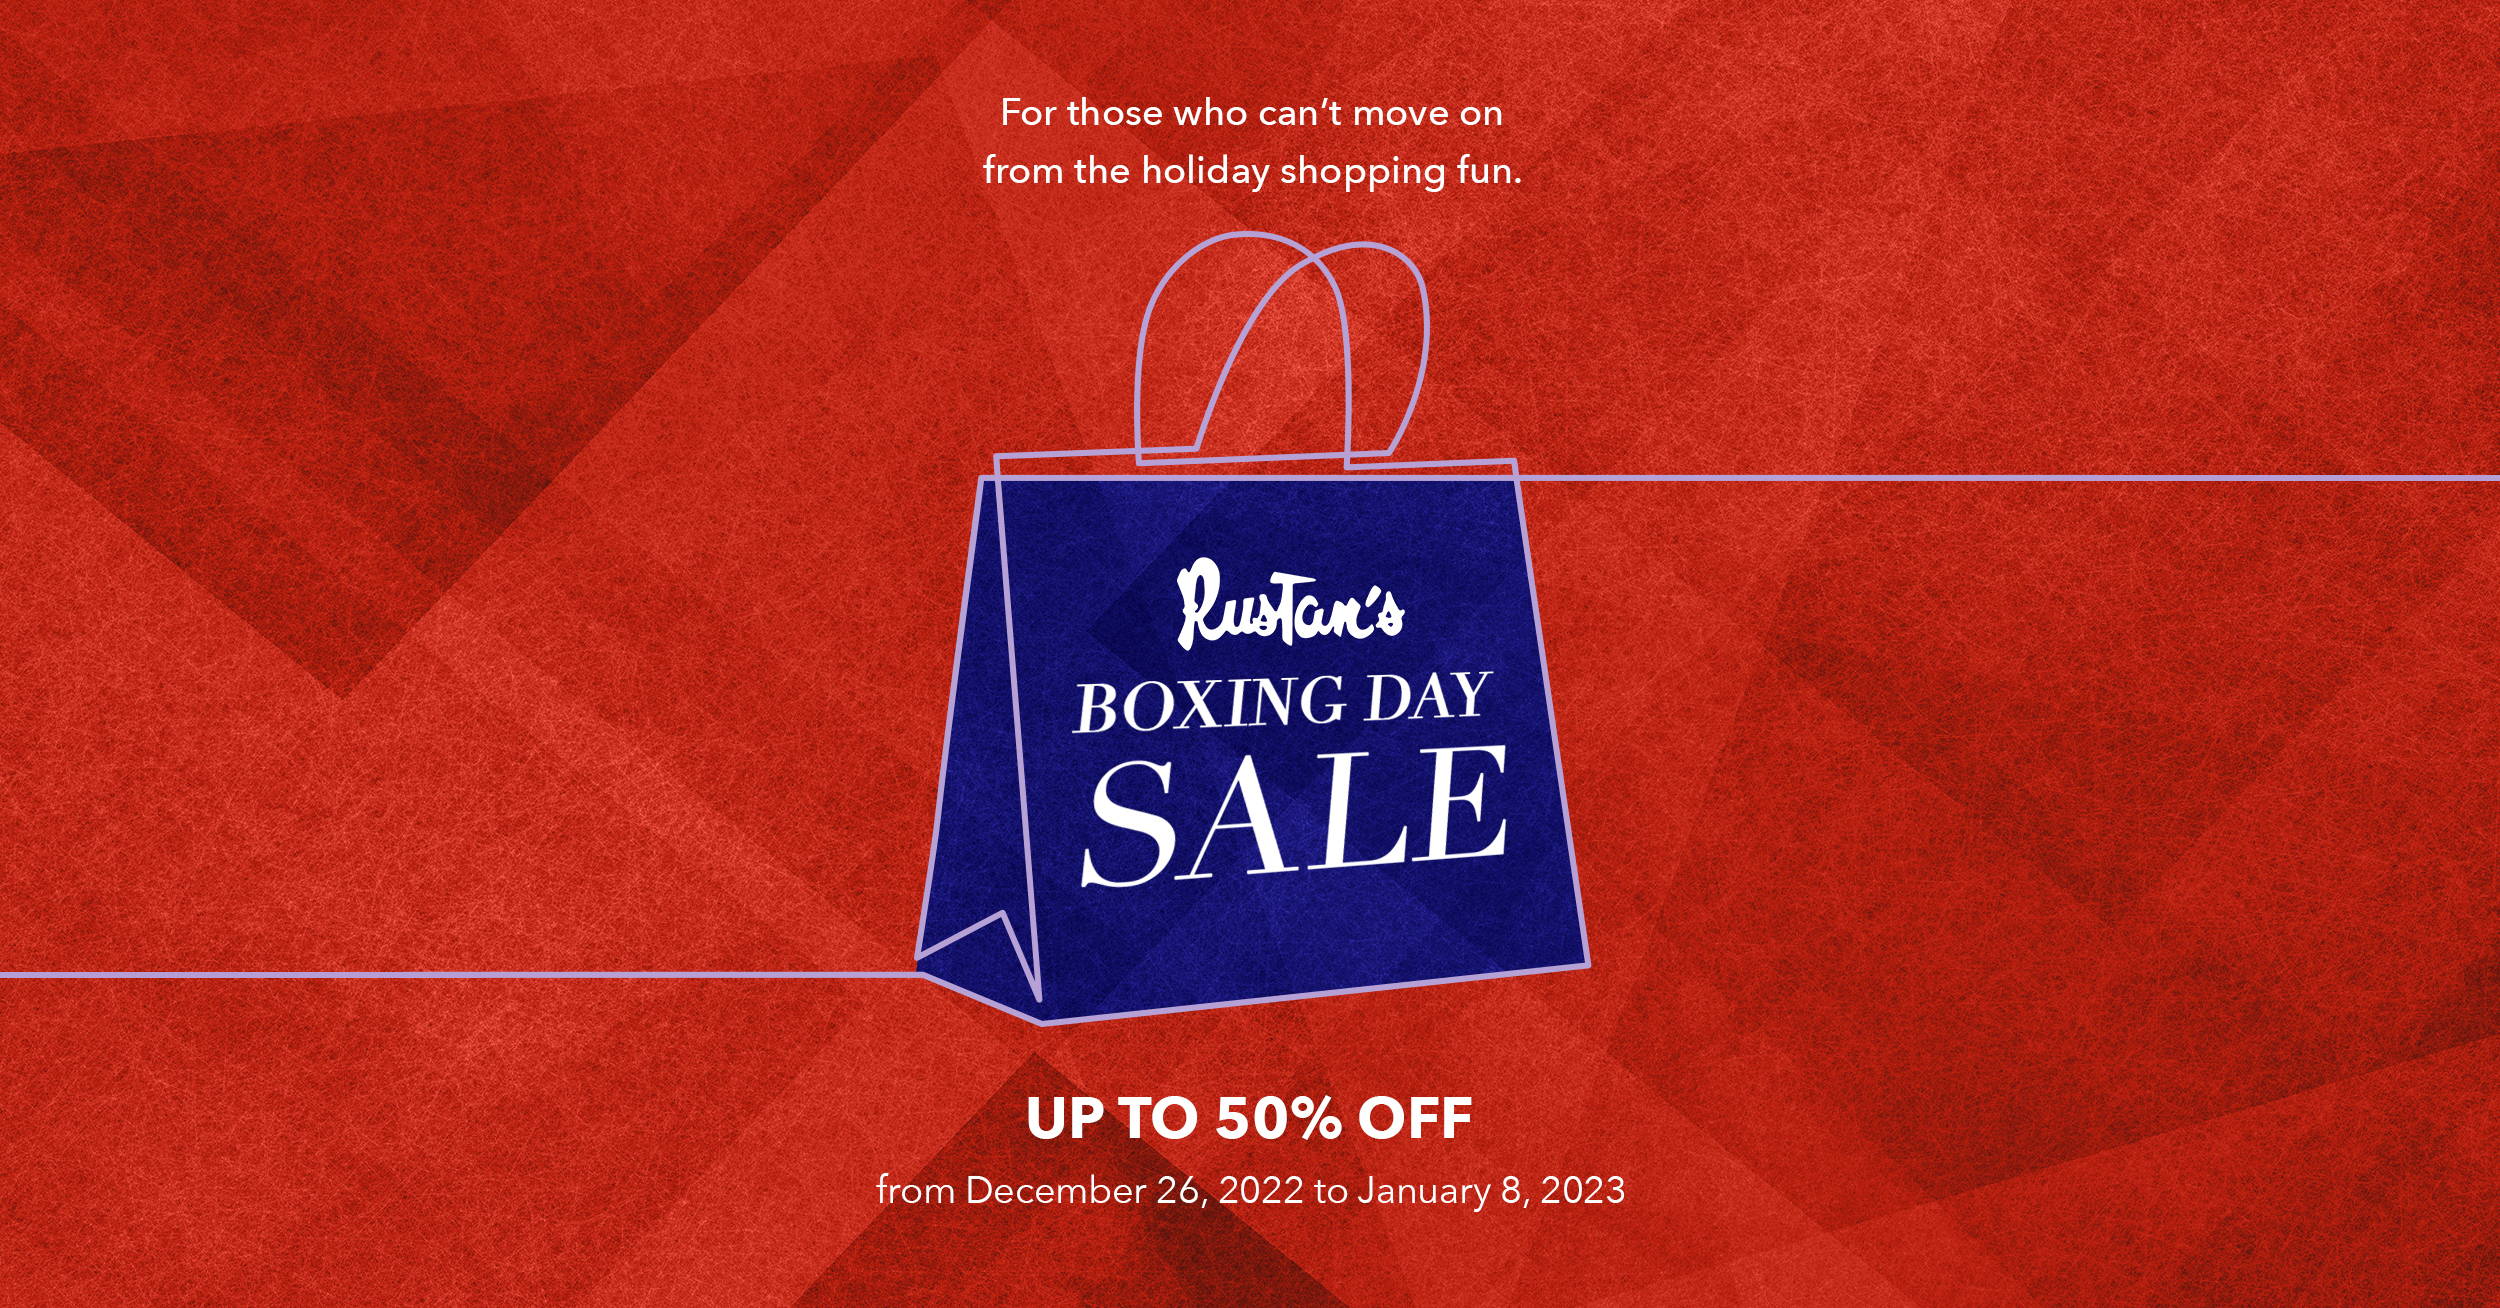 Rustan's Boxing Day Sale: Online Offers